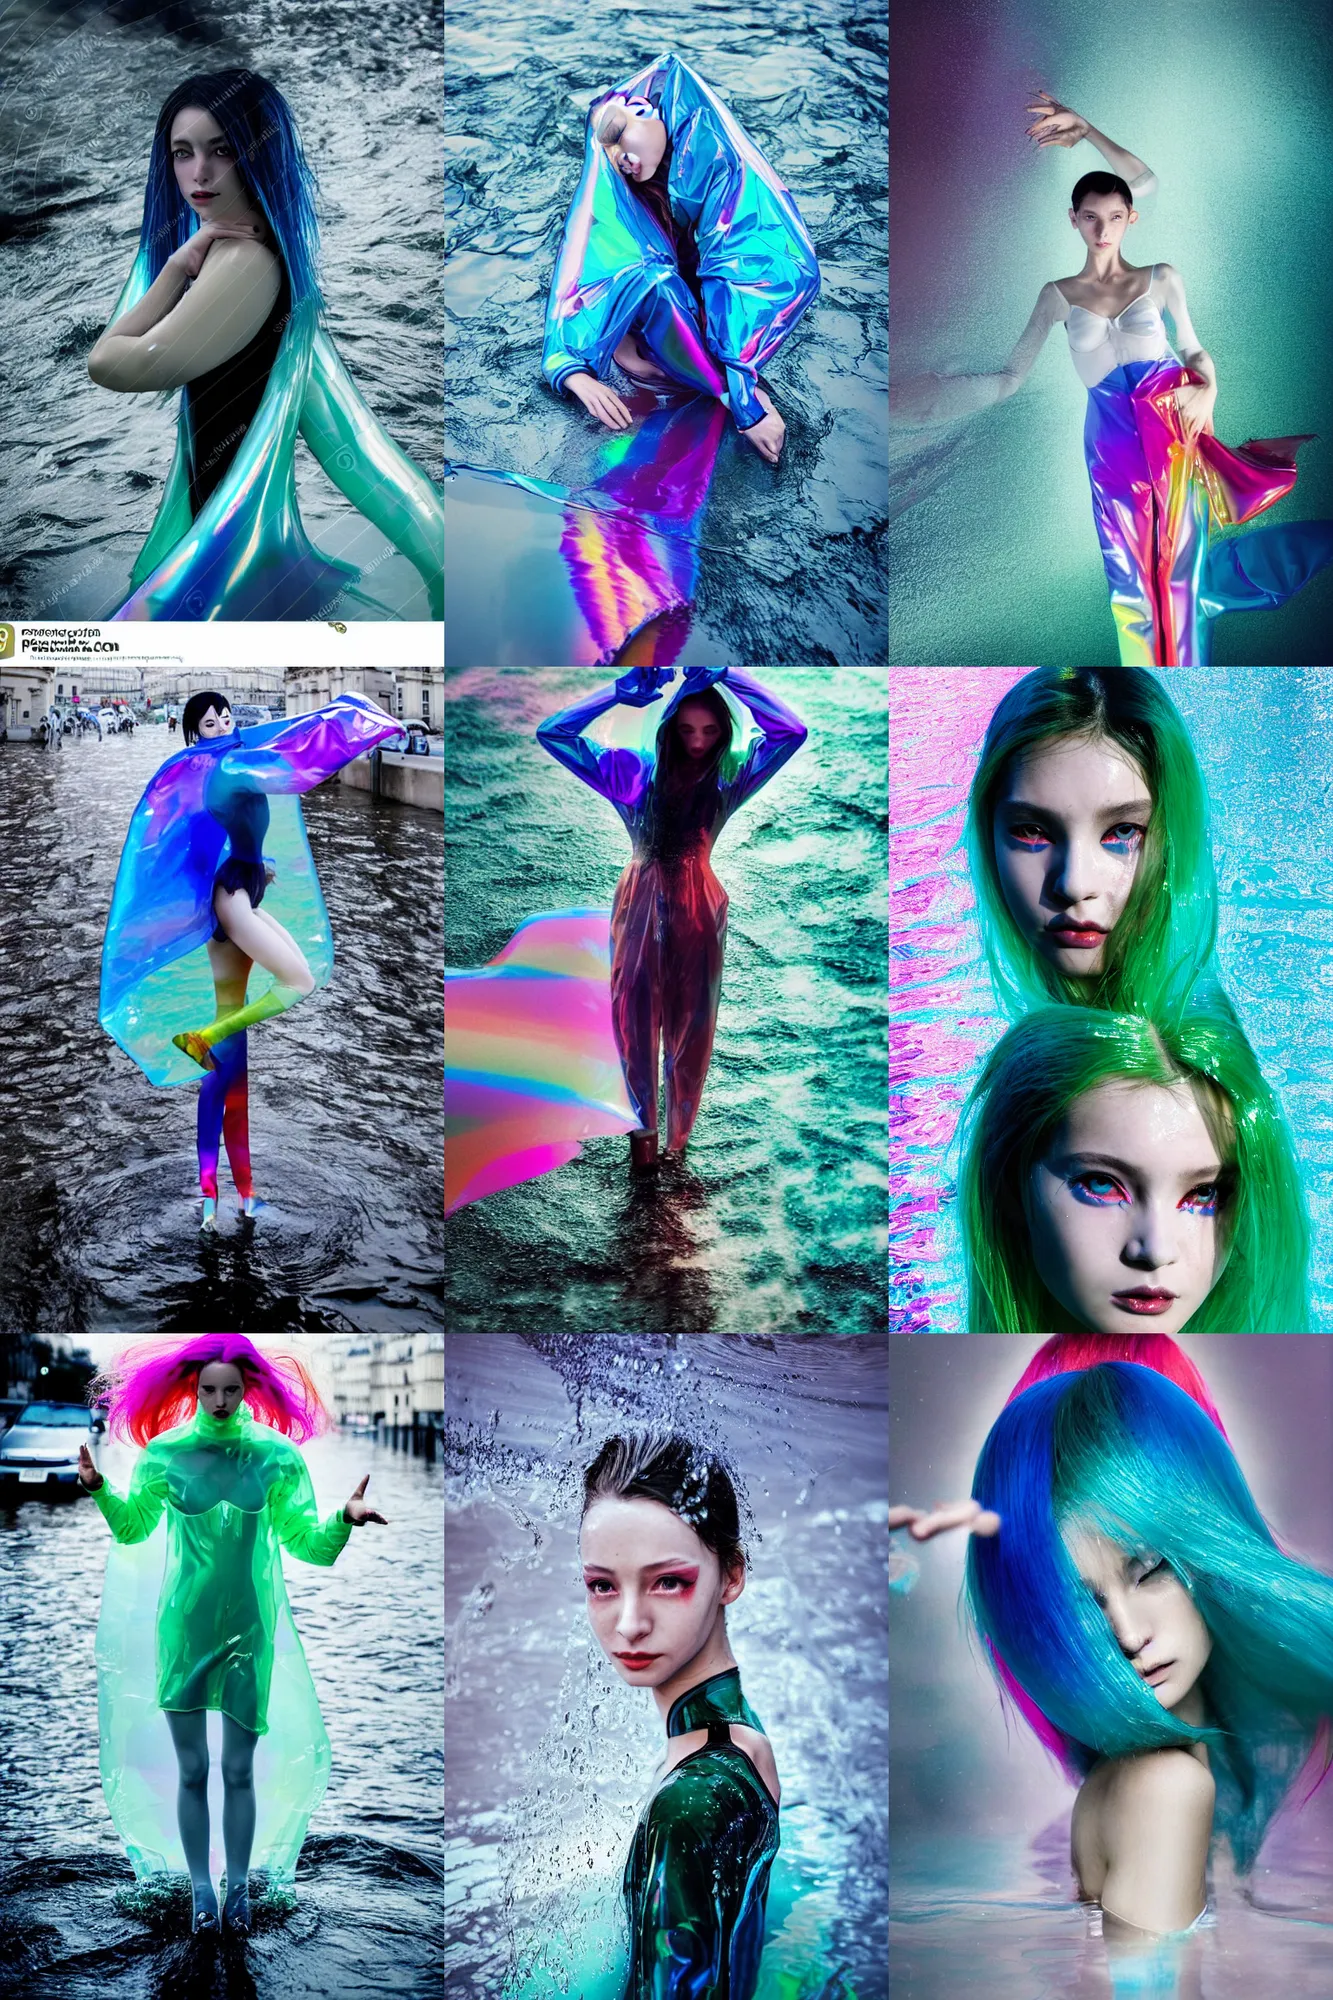 Prompt: Beautiful Jacques Bodin seinen manga Fashion photography portrait of feminine ballet dancer half submerged in heavy nighttime paris floods, water to waste, wearing a translucent refracting rainbow diffusion wet plastic zaha hadid designed specular highlights raincoat, épaule devant pose;blue hair;green anime eyes by wlop;petite; by Nabbteeri, épaule devant pose, ultra realistic, Kodak , 4K, 75mm lens, three point perspective, chiaroscuro, highly detailed, by moma, by Nabbteeri